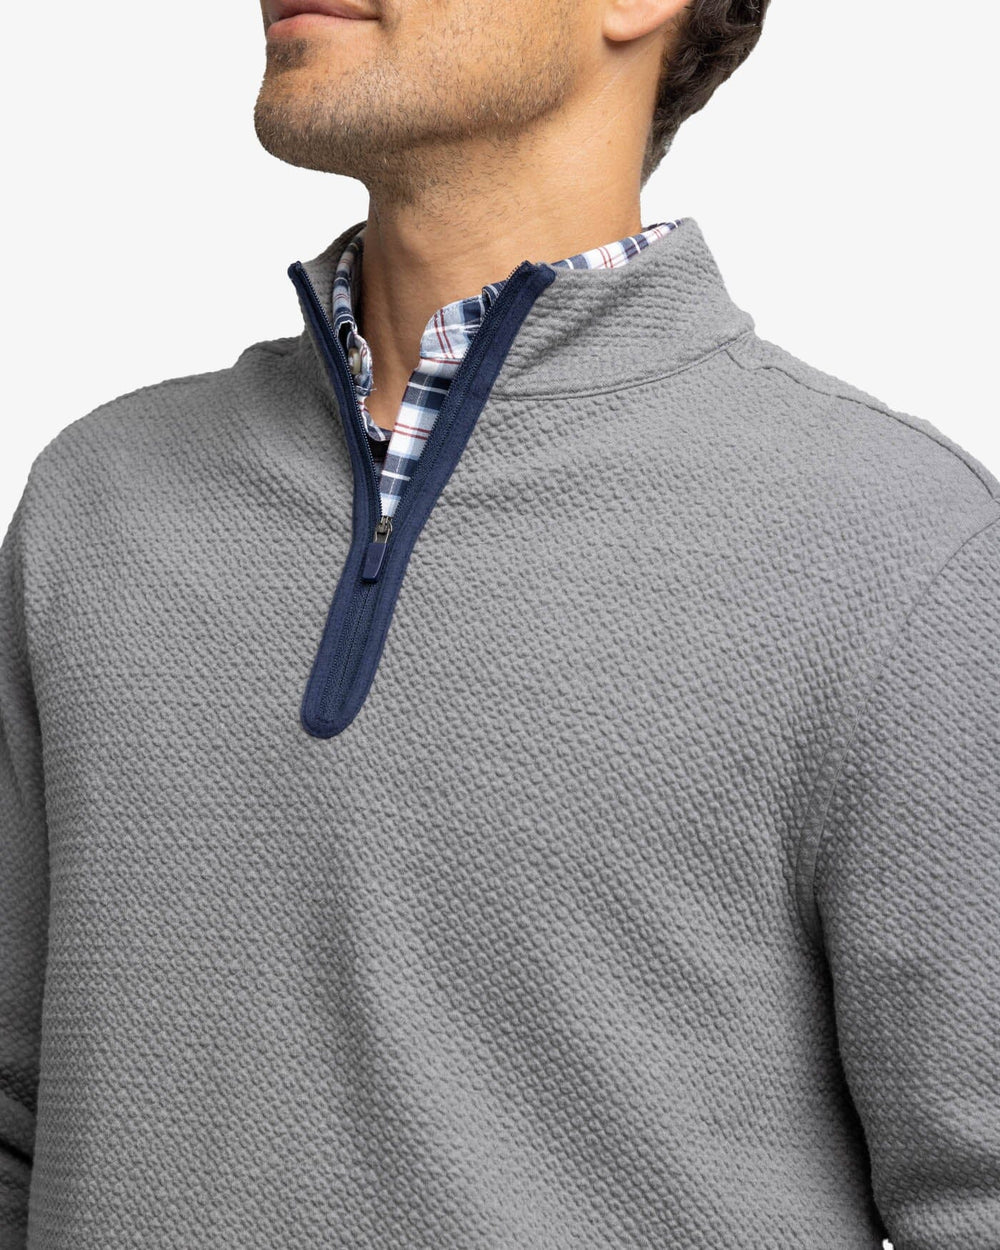 The detail view of the Southern Tide Heather Outbound Quarter Zip by Southern Tide - Heather Shadow Grey